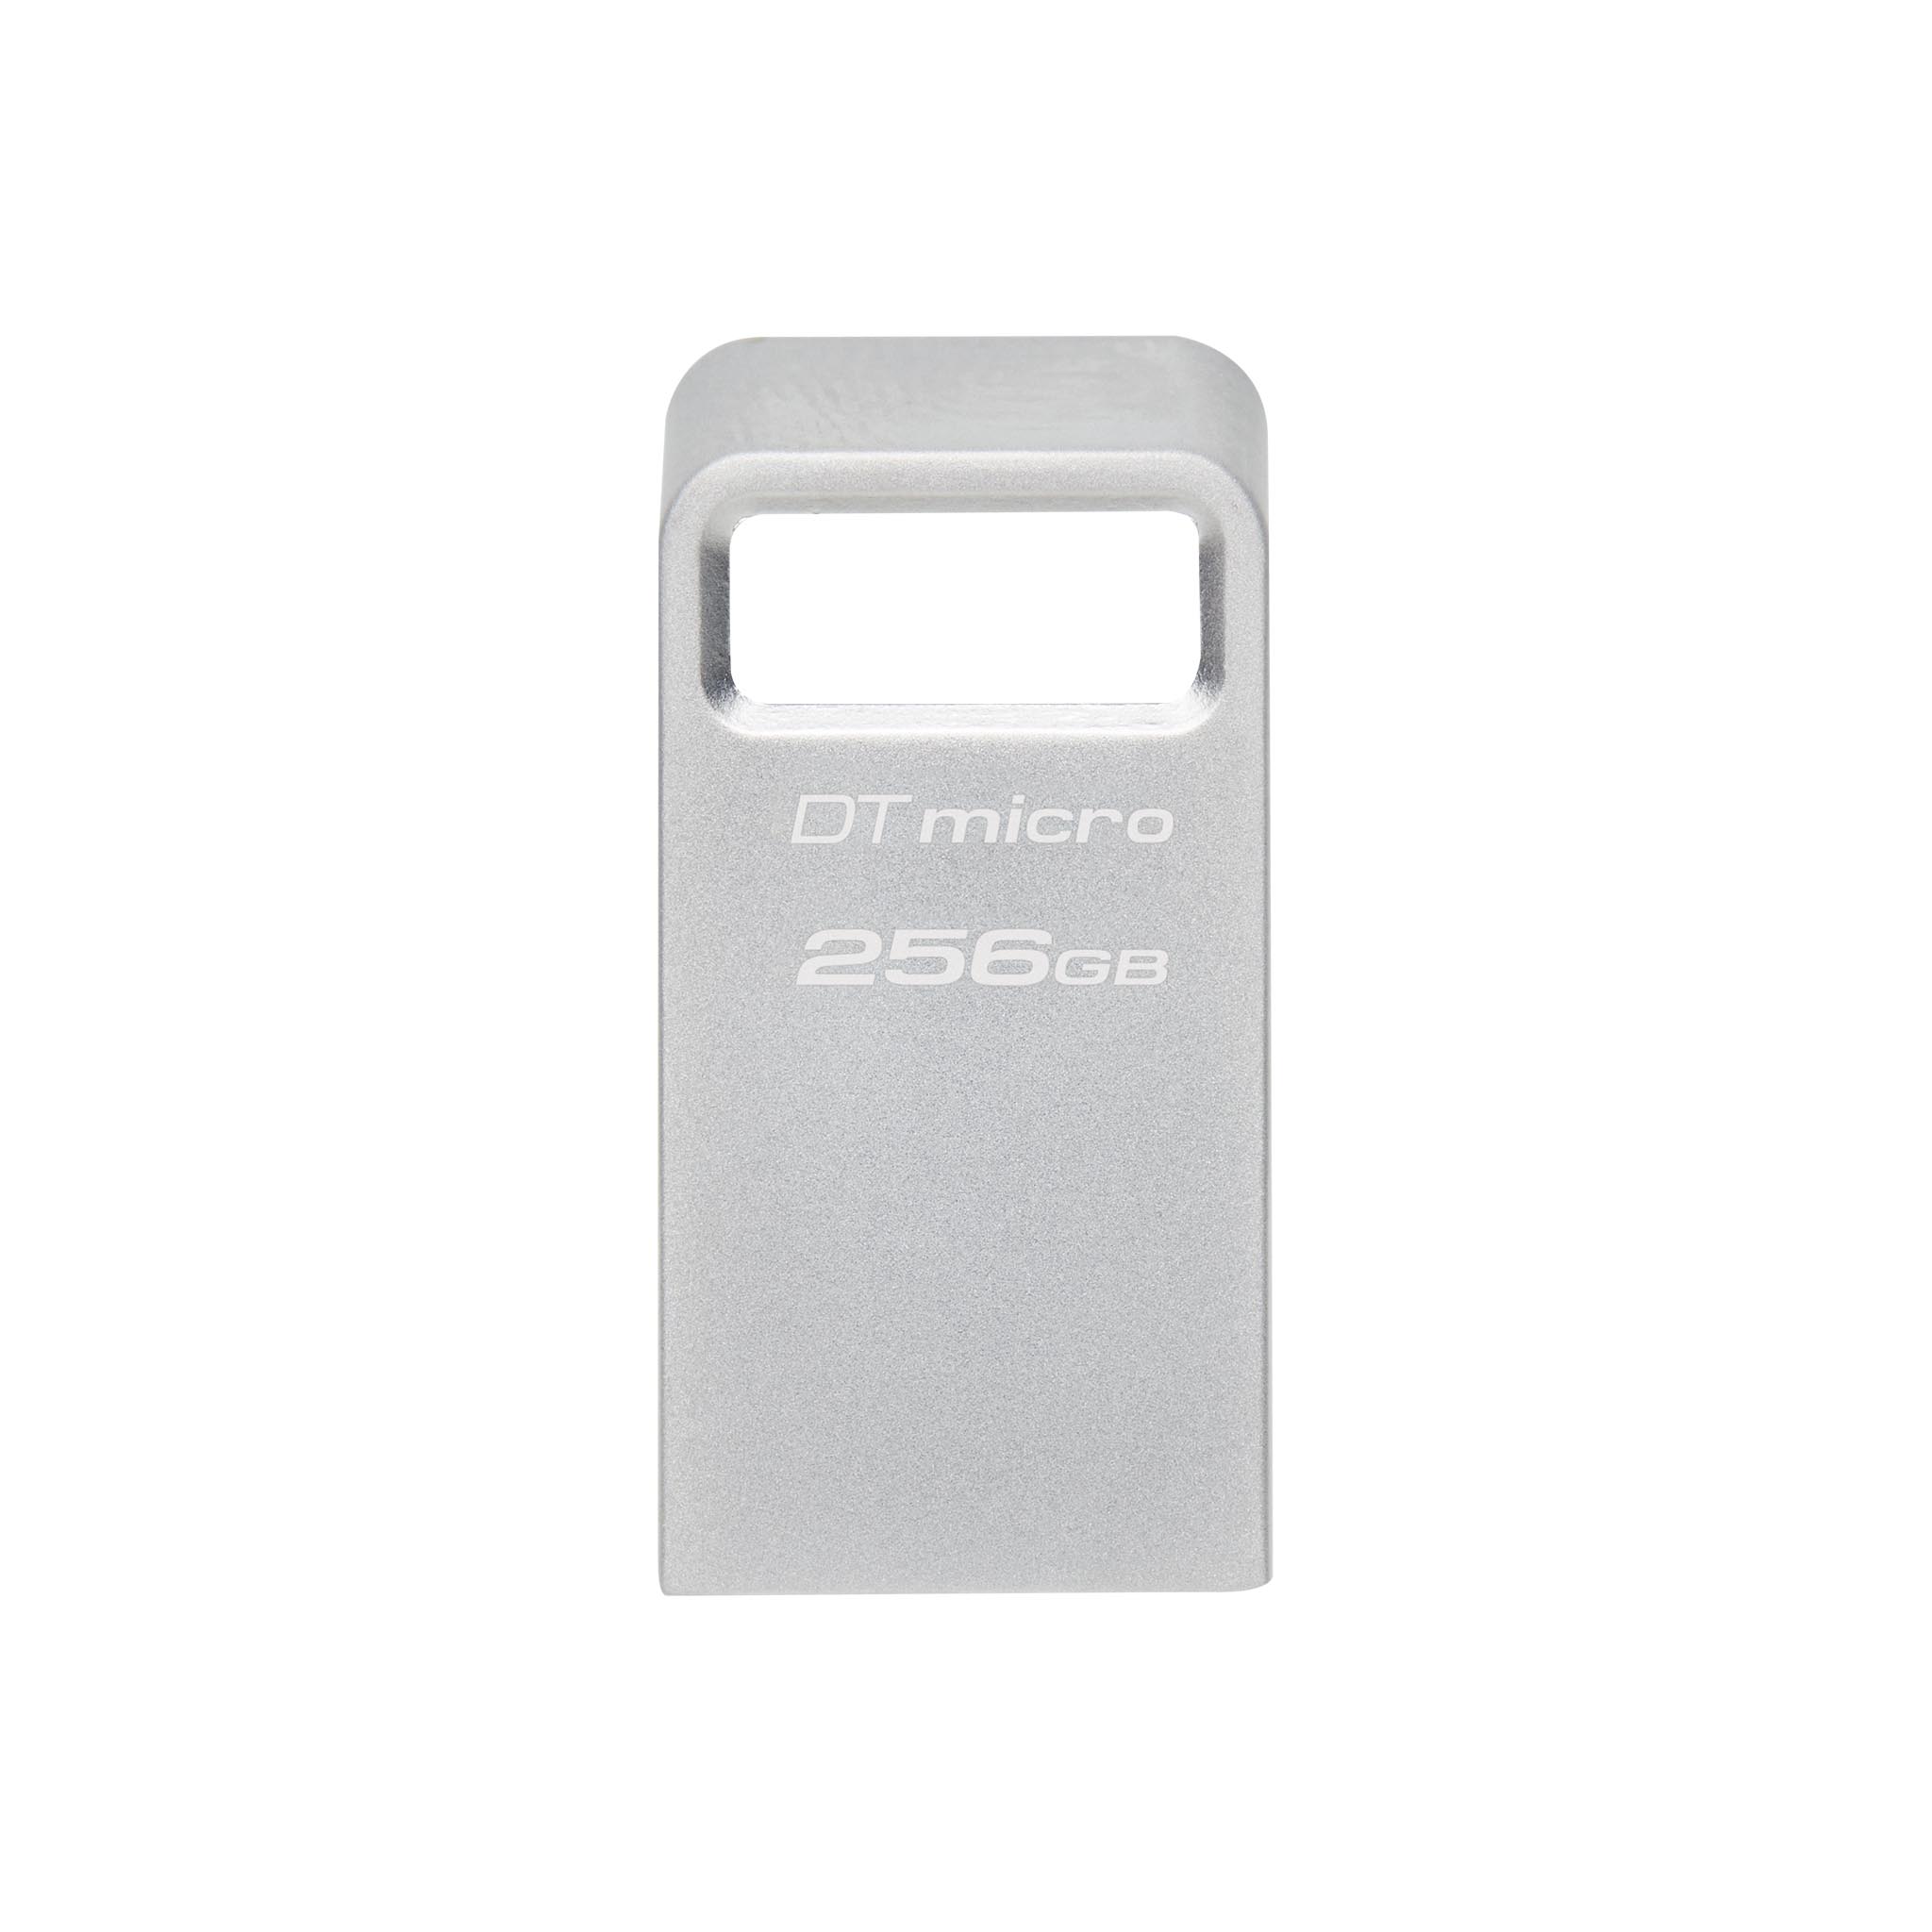 Kingston announces world's first 128GB USB flash drive: Digital Photography  Review